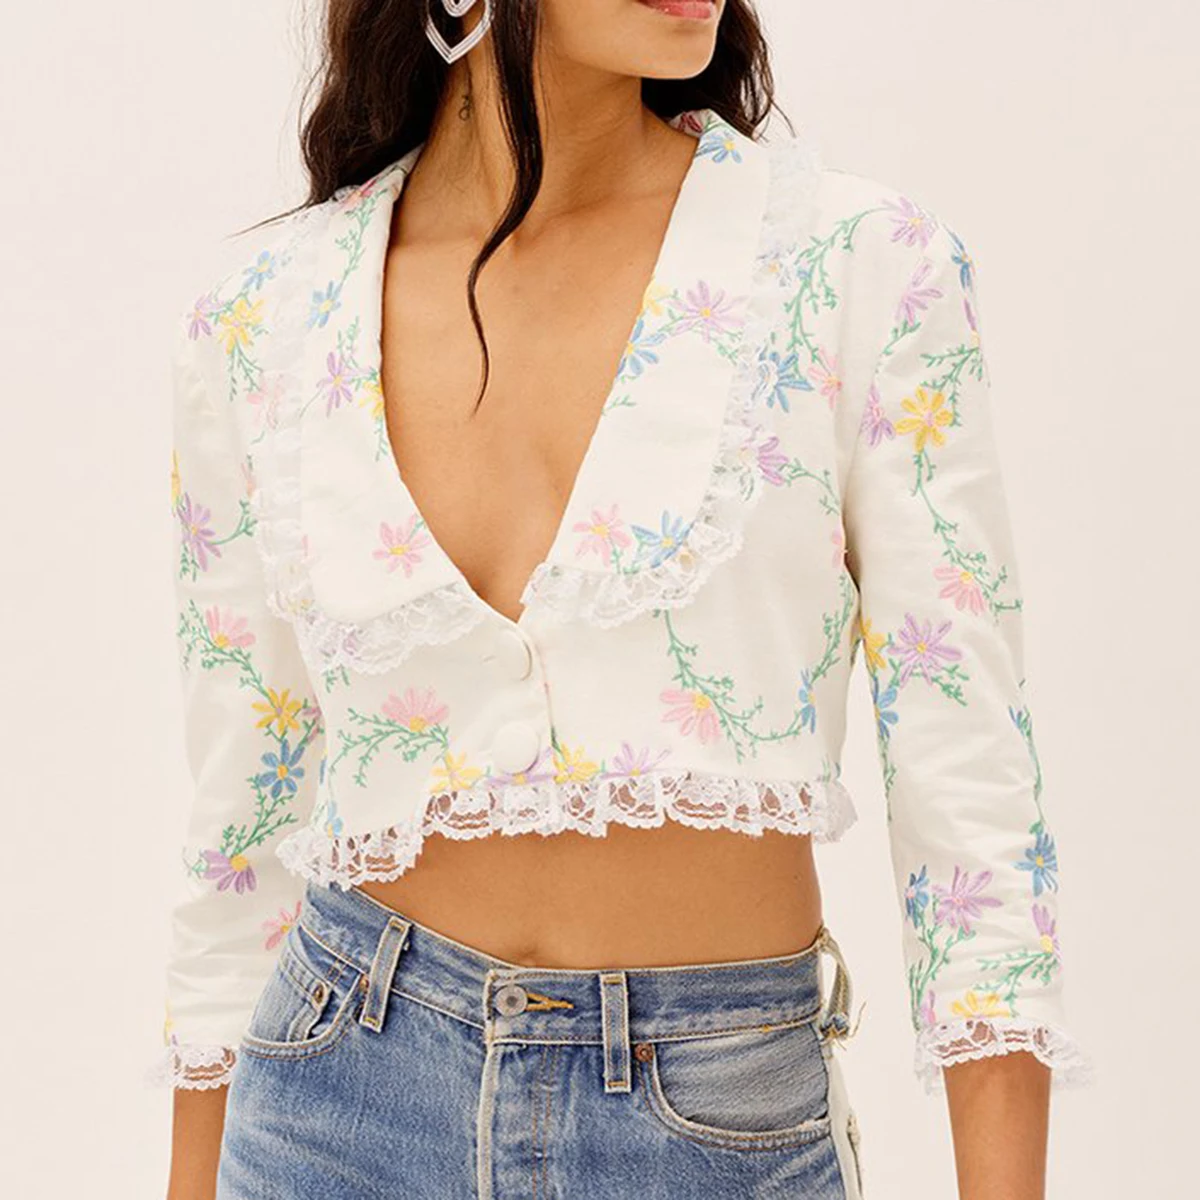 

Jastie 2021 Summer Women Blouses Top White Dream V-Neck Daisy Embroidery Lace Cardigan Bohemian Casual Vacation Female Tops